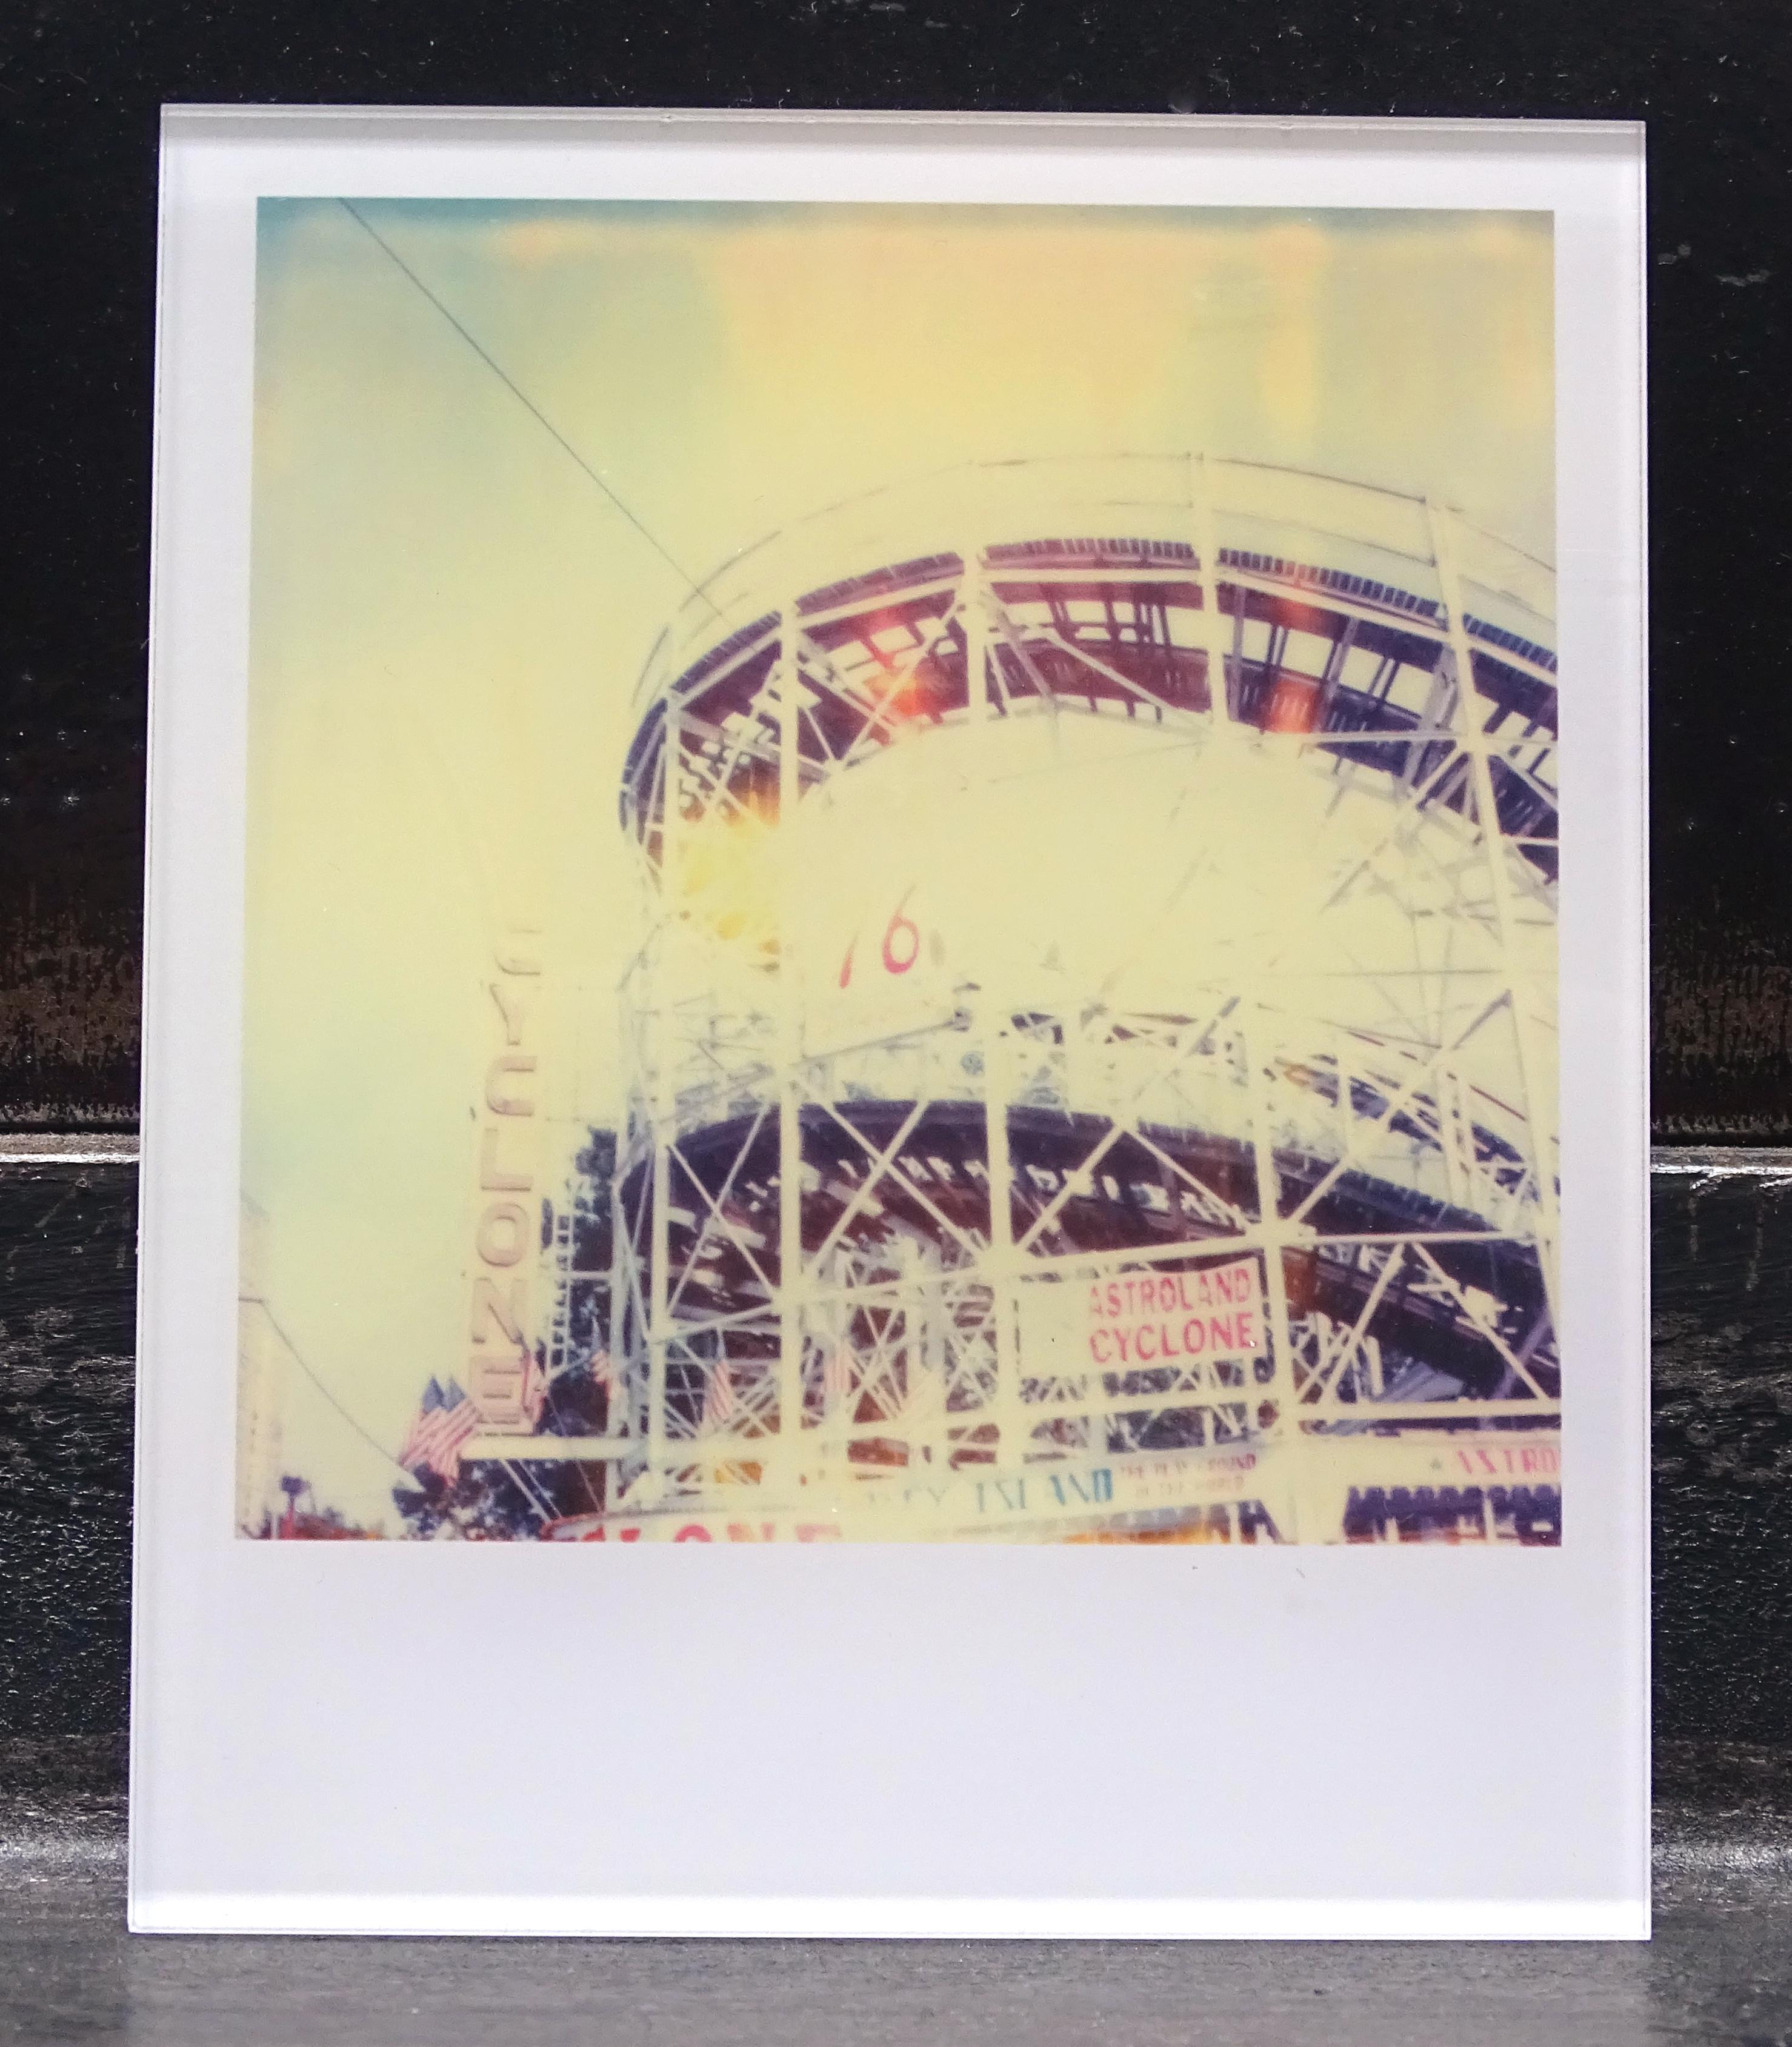 Stefanie Schneider's Minis
Cyclone (Stay), 2006

Signed and signature brand on verso.
Lambda digital Color Photographs based on the Polaroid.
Sandwiched in between Plexiglass (thickness 0.7cm)

from the movie 'Stay' by Marc Forster, featuring Ewan